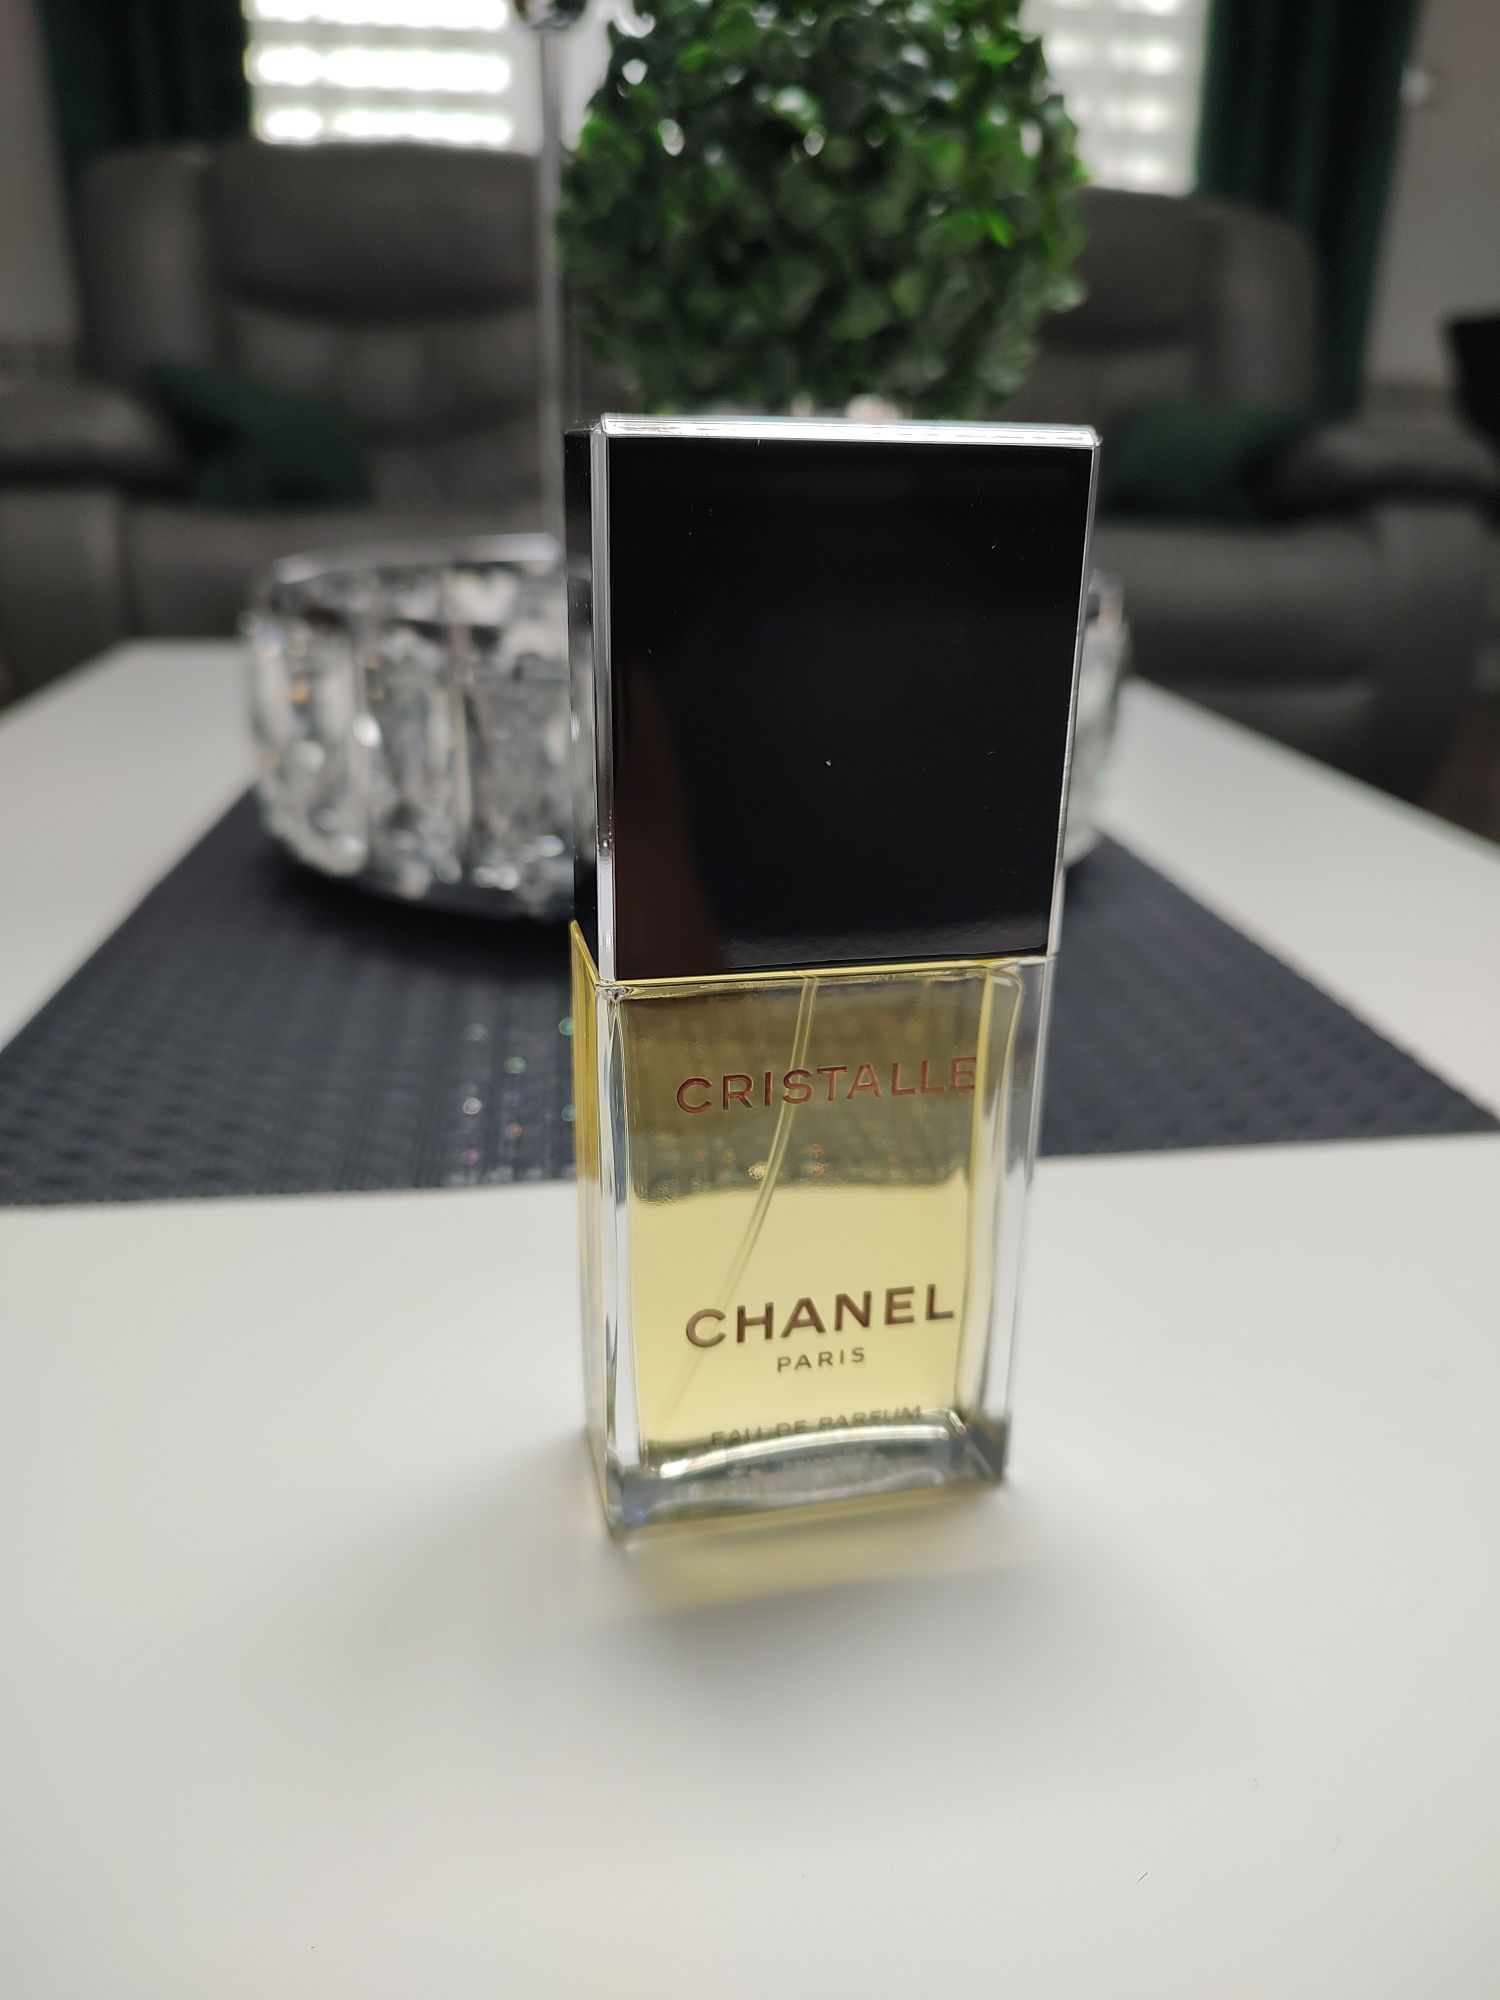 Perfumy Chanel Cristalle